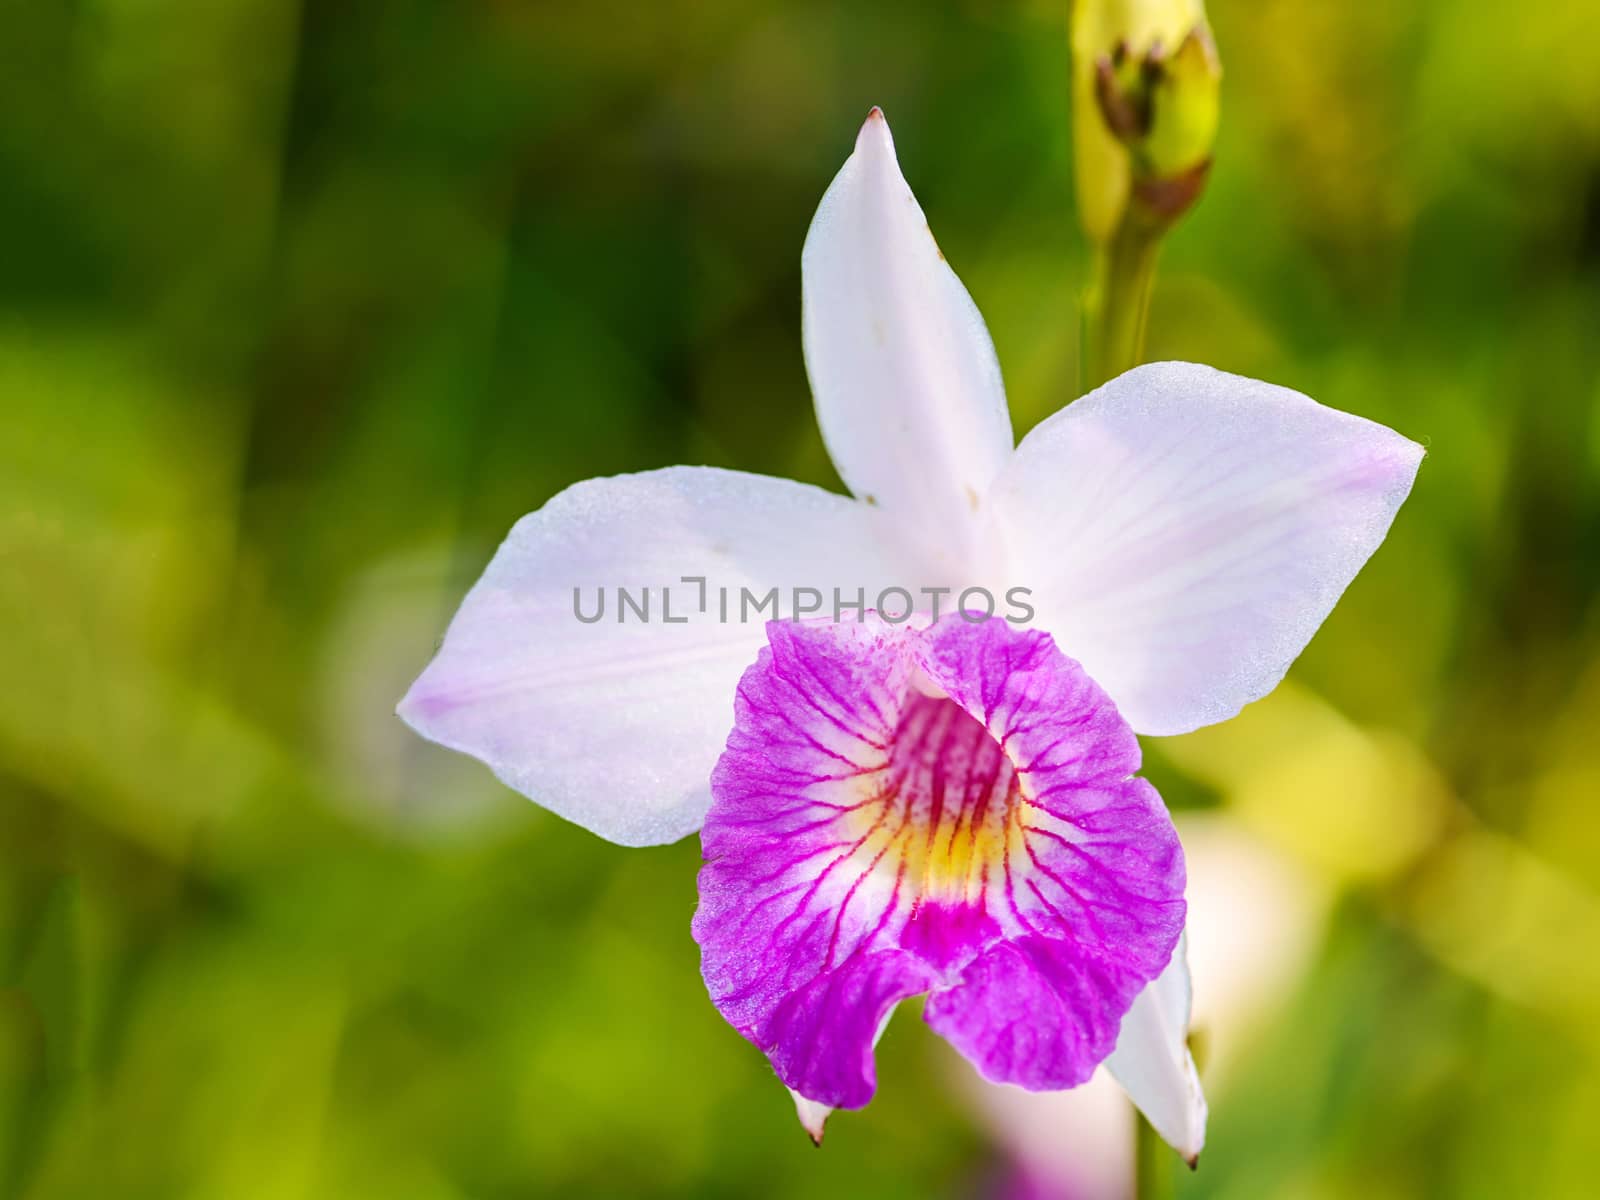 Arundina graminifolia orchid close up with blurry background 